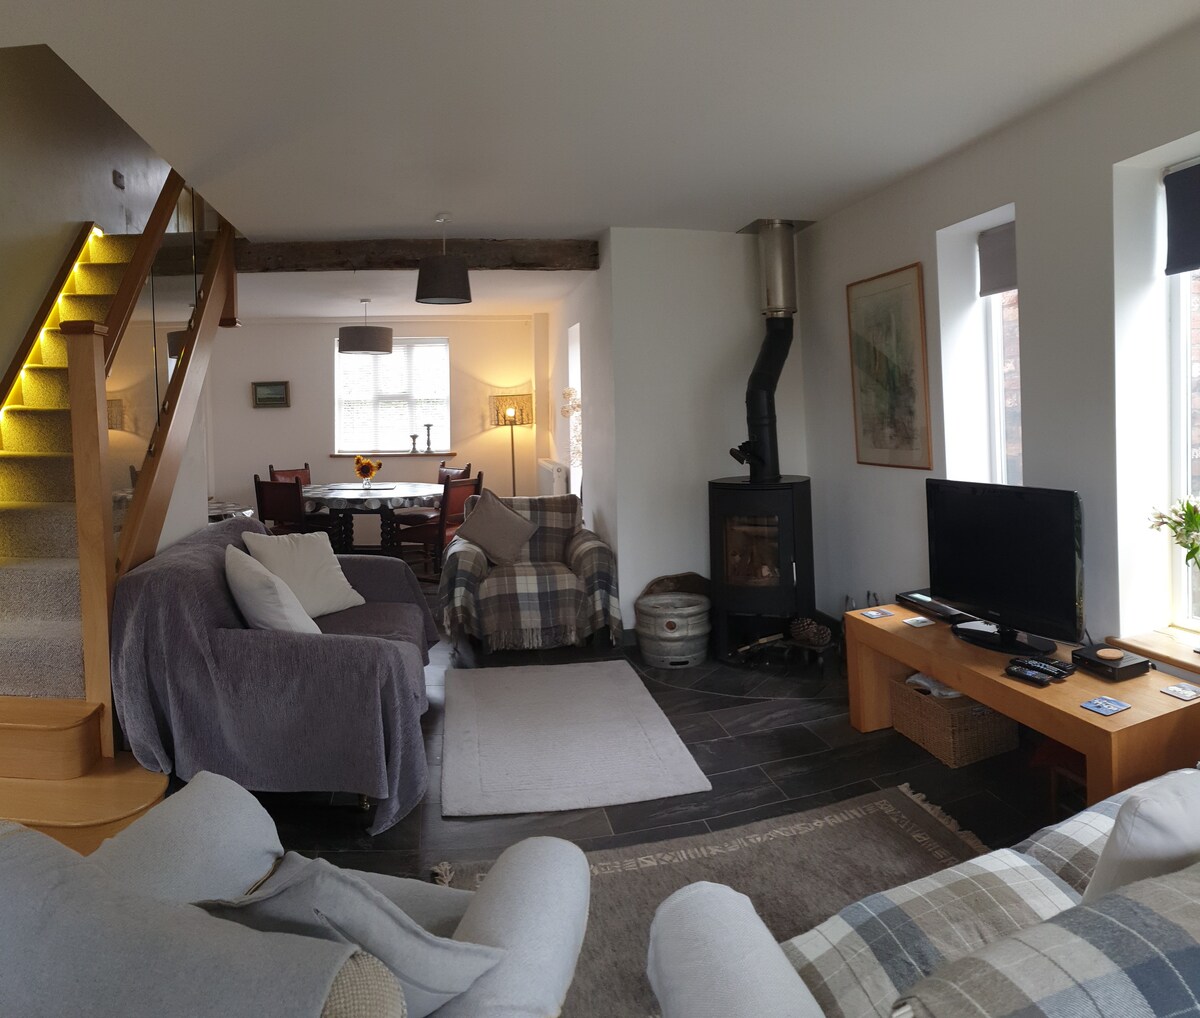 3xdouble ensuite bedrooms fab to explore Mid Wales